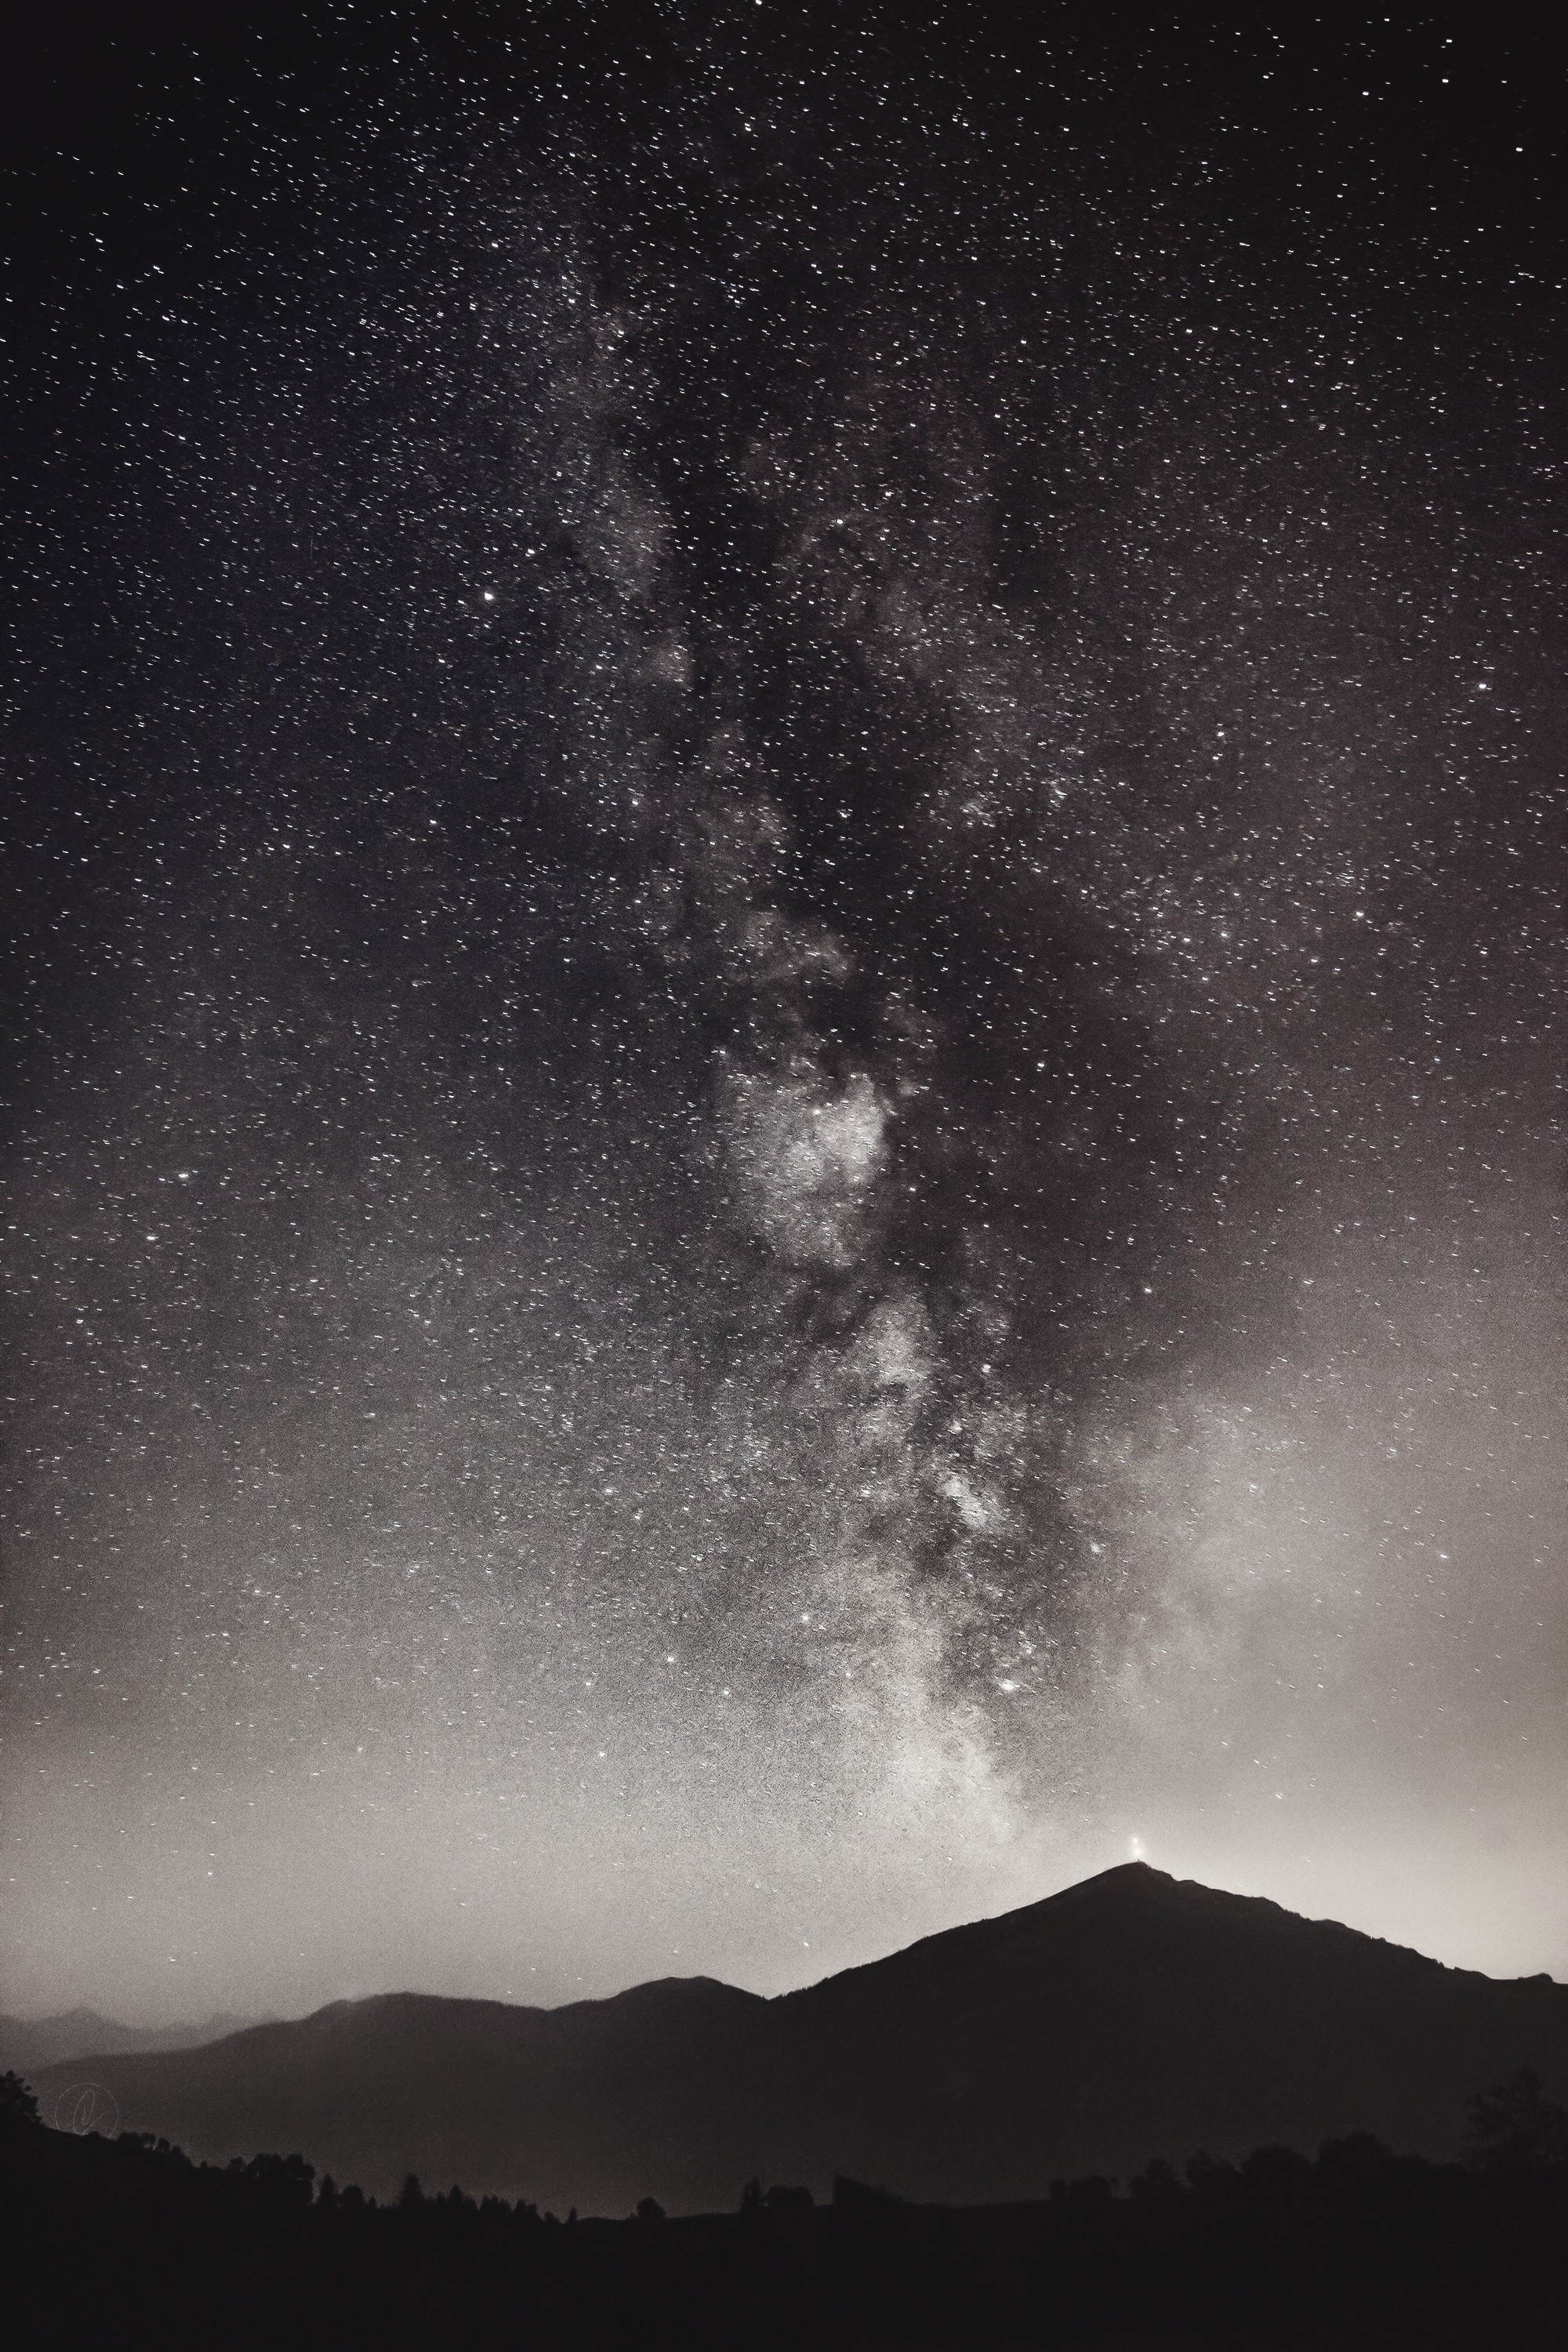 General 2000x3000 nature stars space monochrome Milky Way space art starred sky night mountains night sky landscape sky